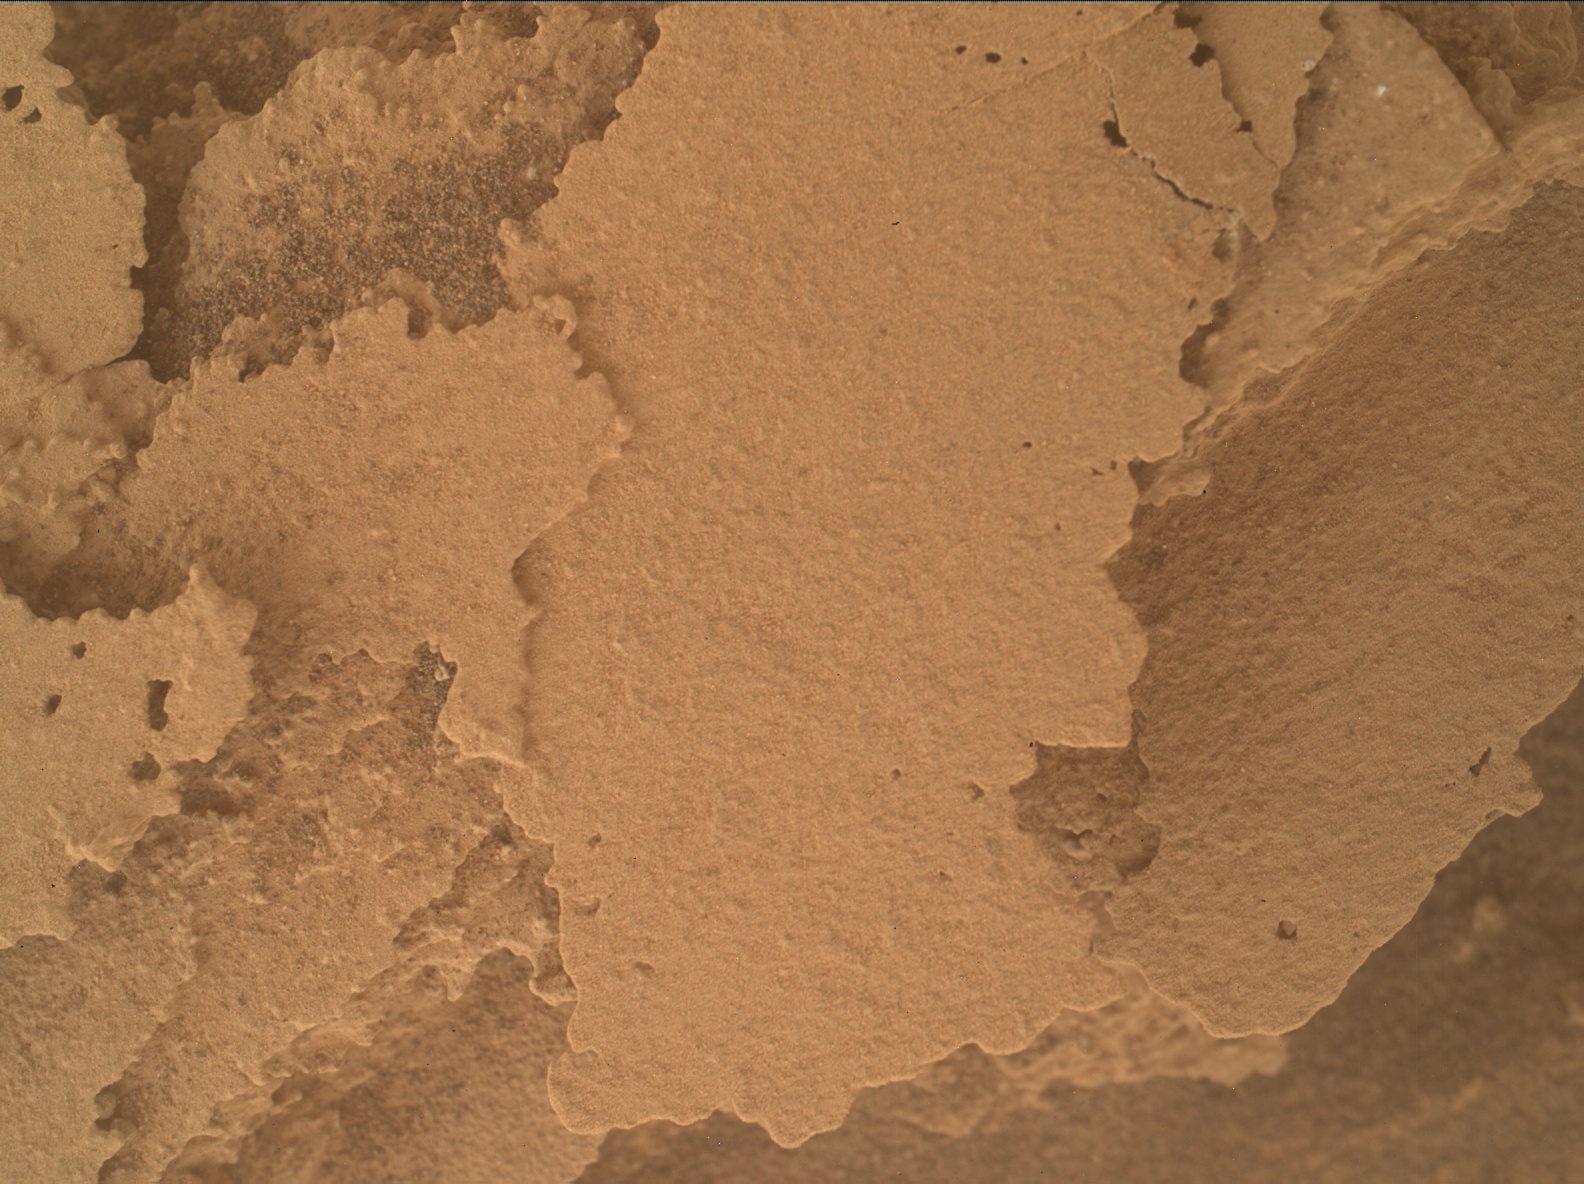 Nasa's Mars rover Curiosity acquired this image using its Mars Hand Lens Imager (MAHLI) on Sol 3885